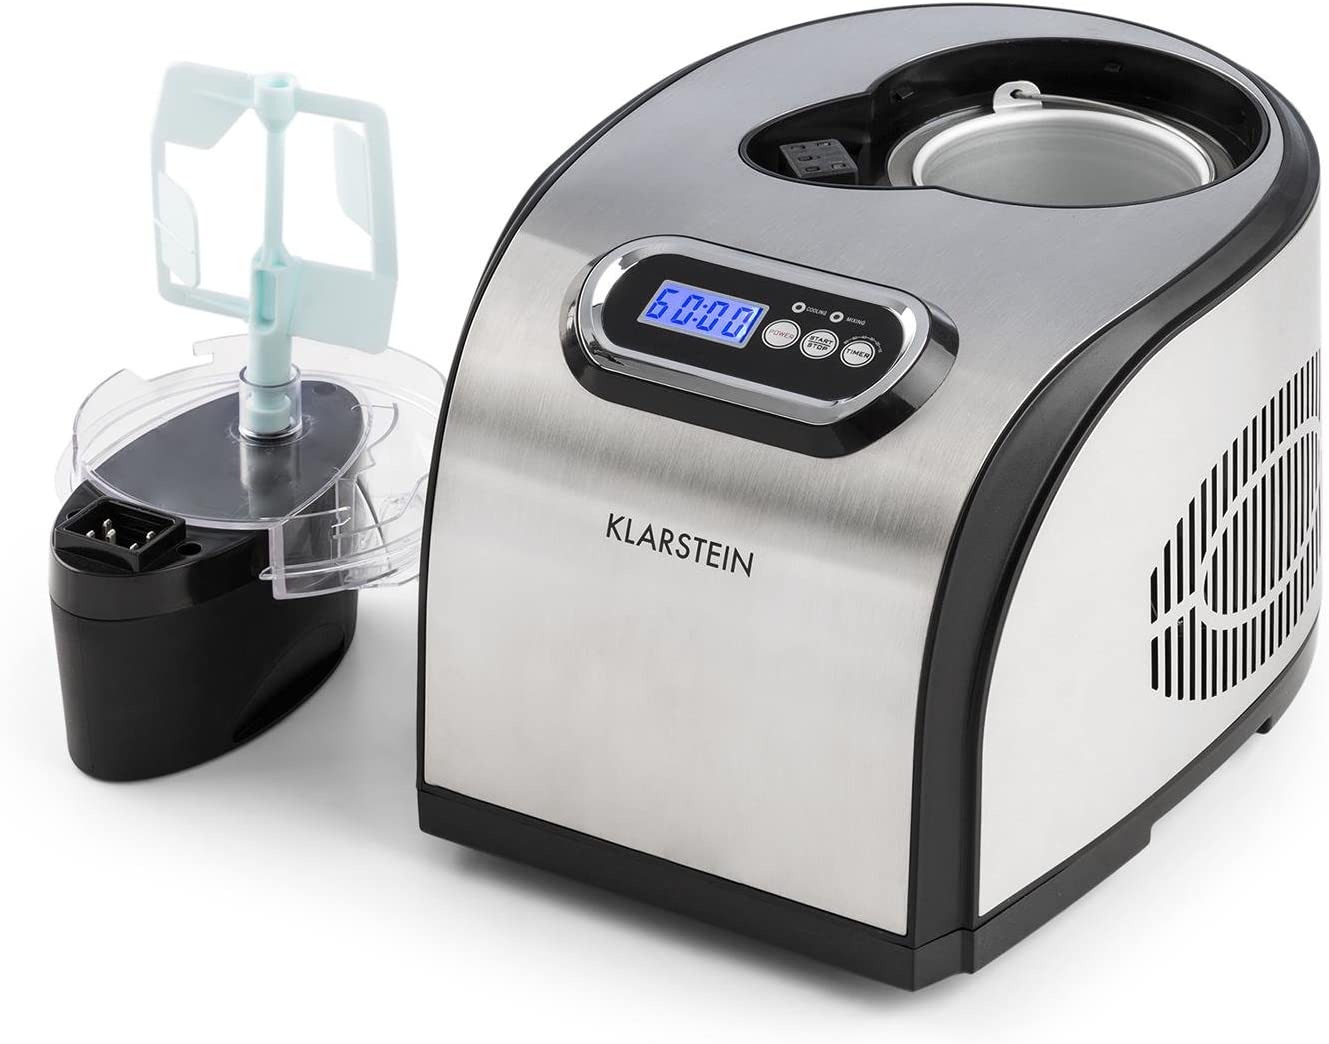 Klarstein Sweet Dreams Ice Cream Maker, Ice Cream Maker, Frozen Yogurt Compressor, Ice and Yoghurt Specialities, 1.5 L, Timer, Remaining Working Time Display, Includes Ice Ladle and Measuring Cup, Silver